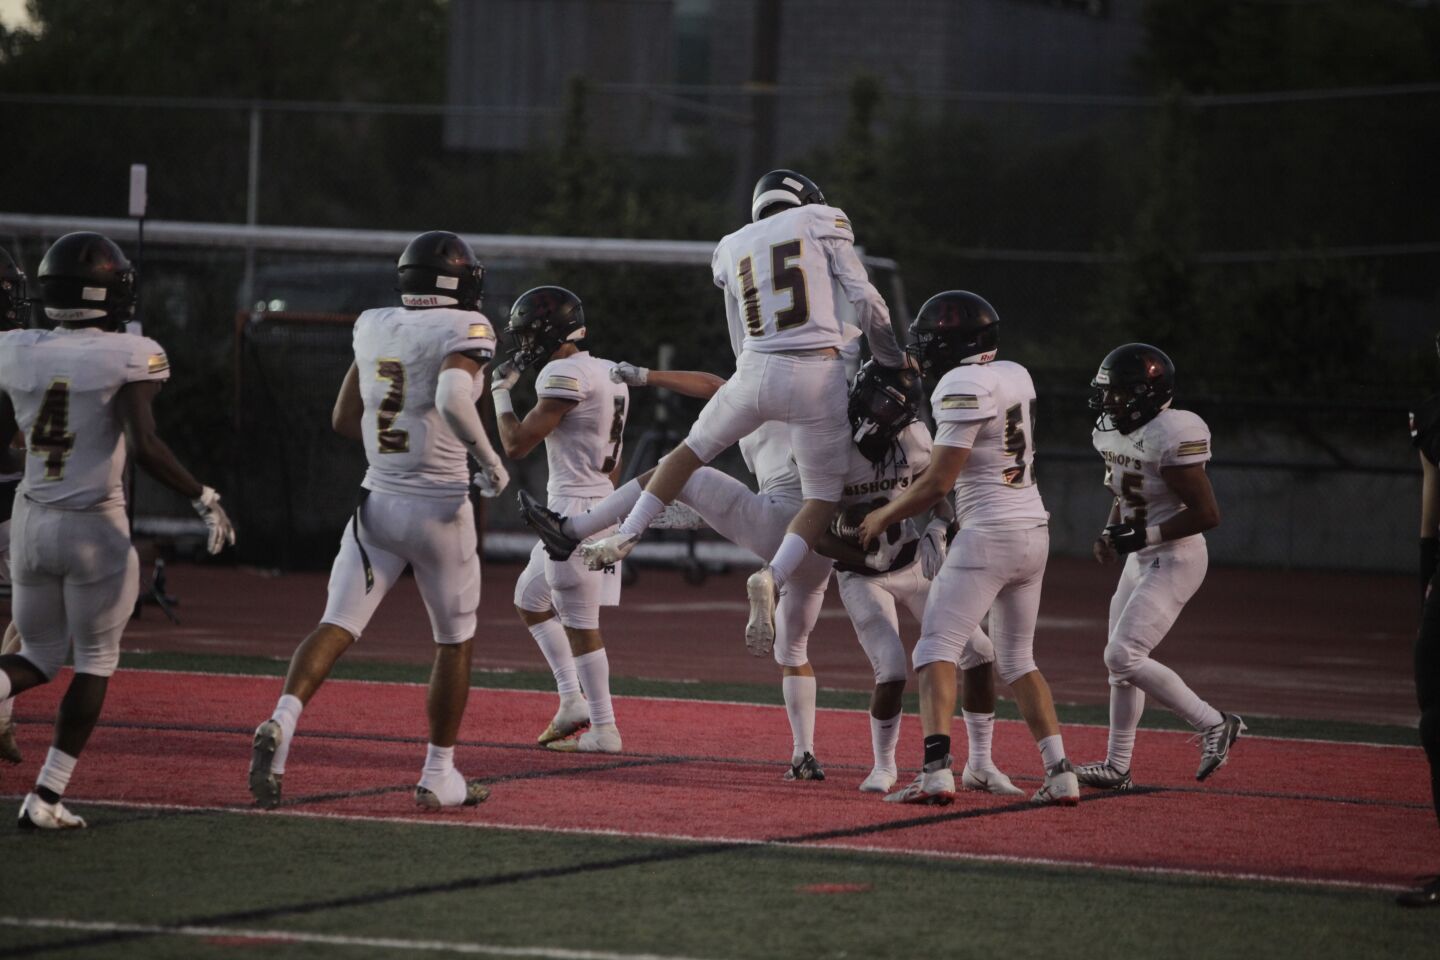 The Bishop's Knights celebrate one of their four touchdowns of the night.